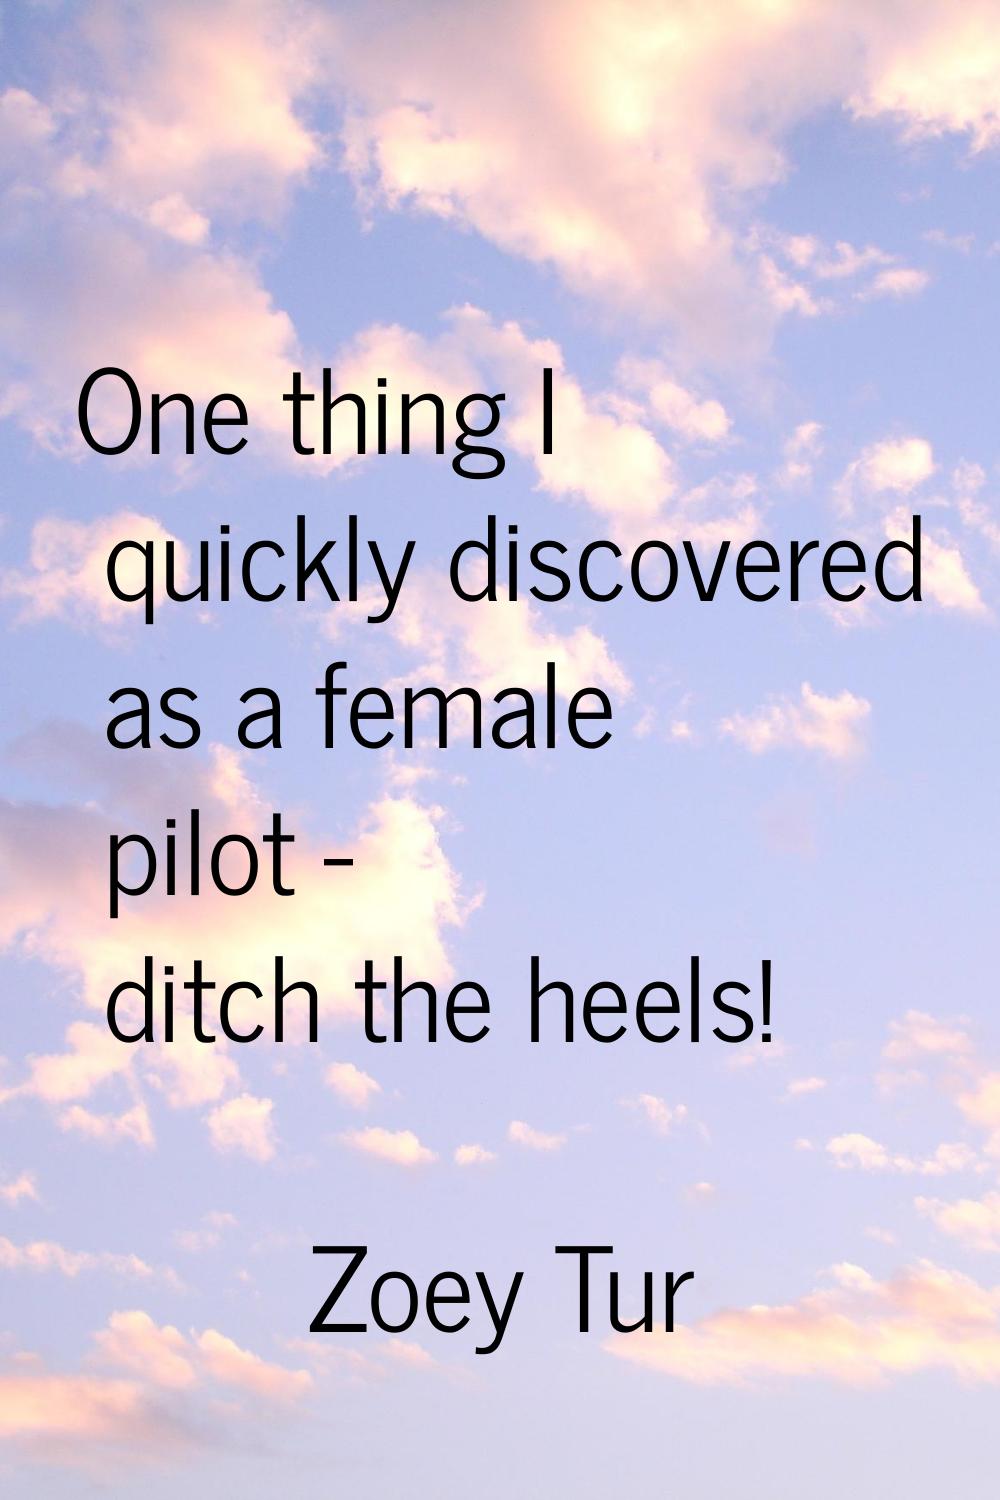 One thing I quickly discovered as a female pilot - ditch the heels!